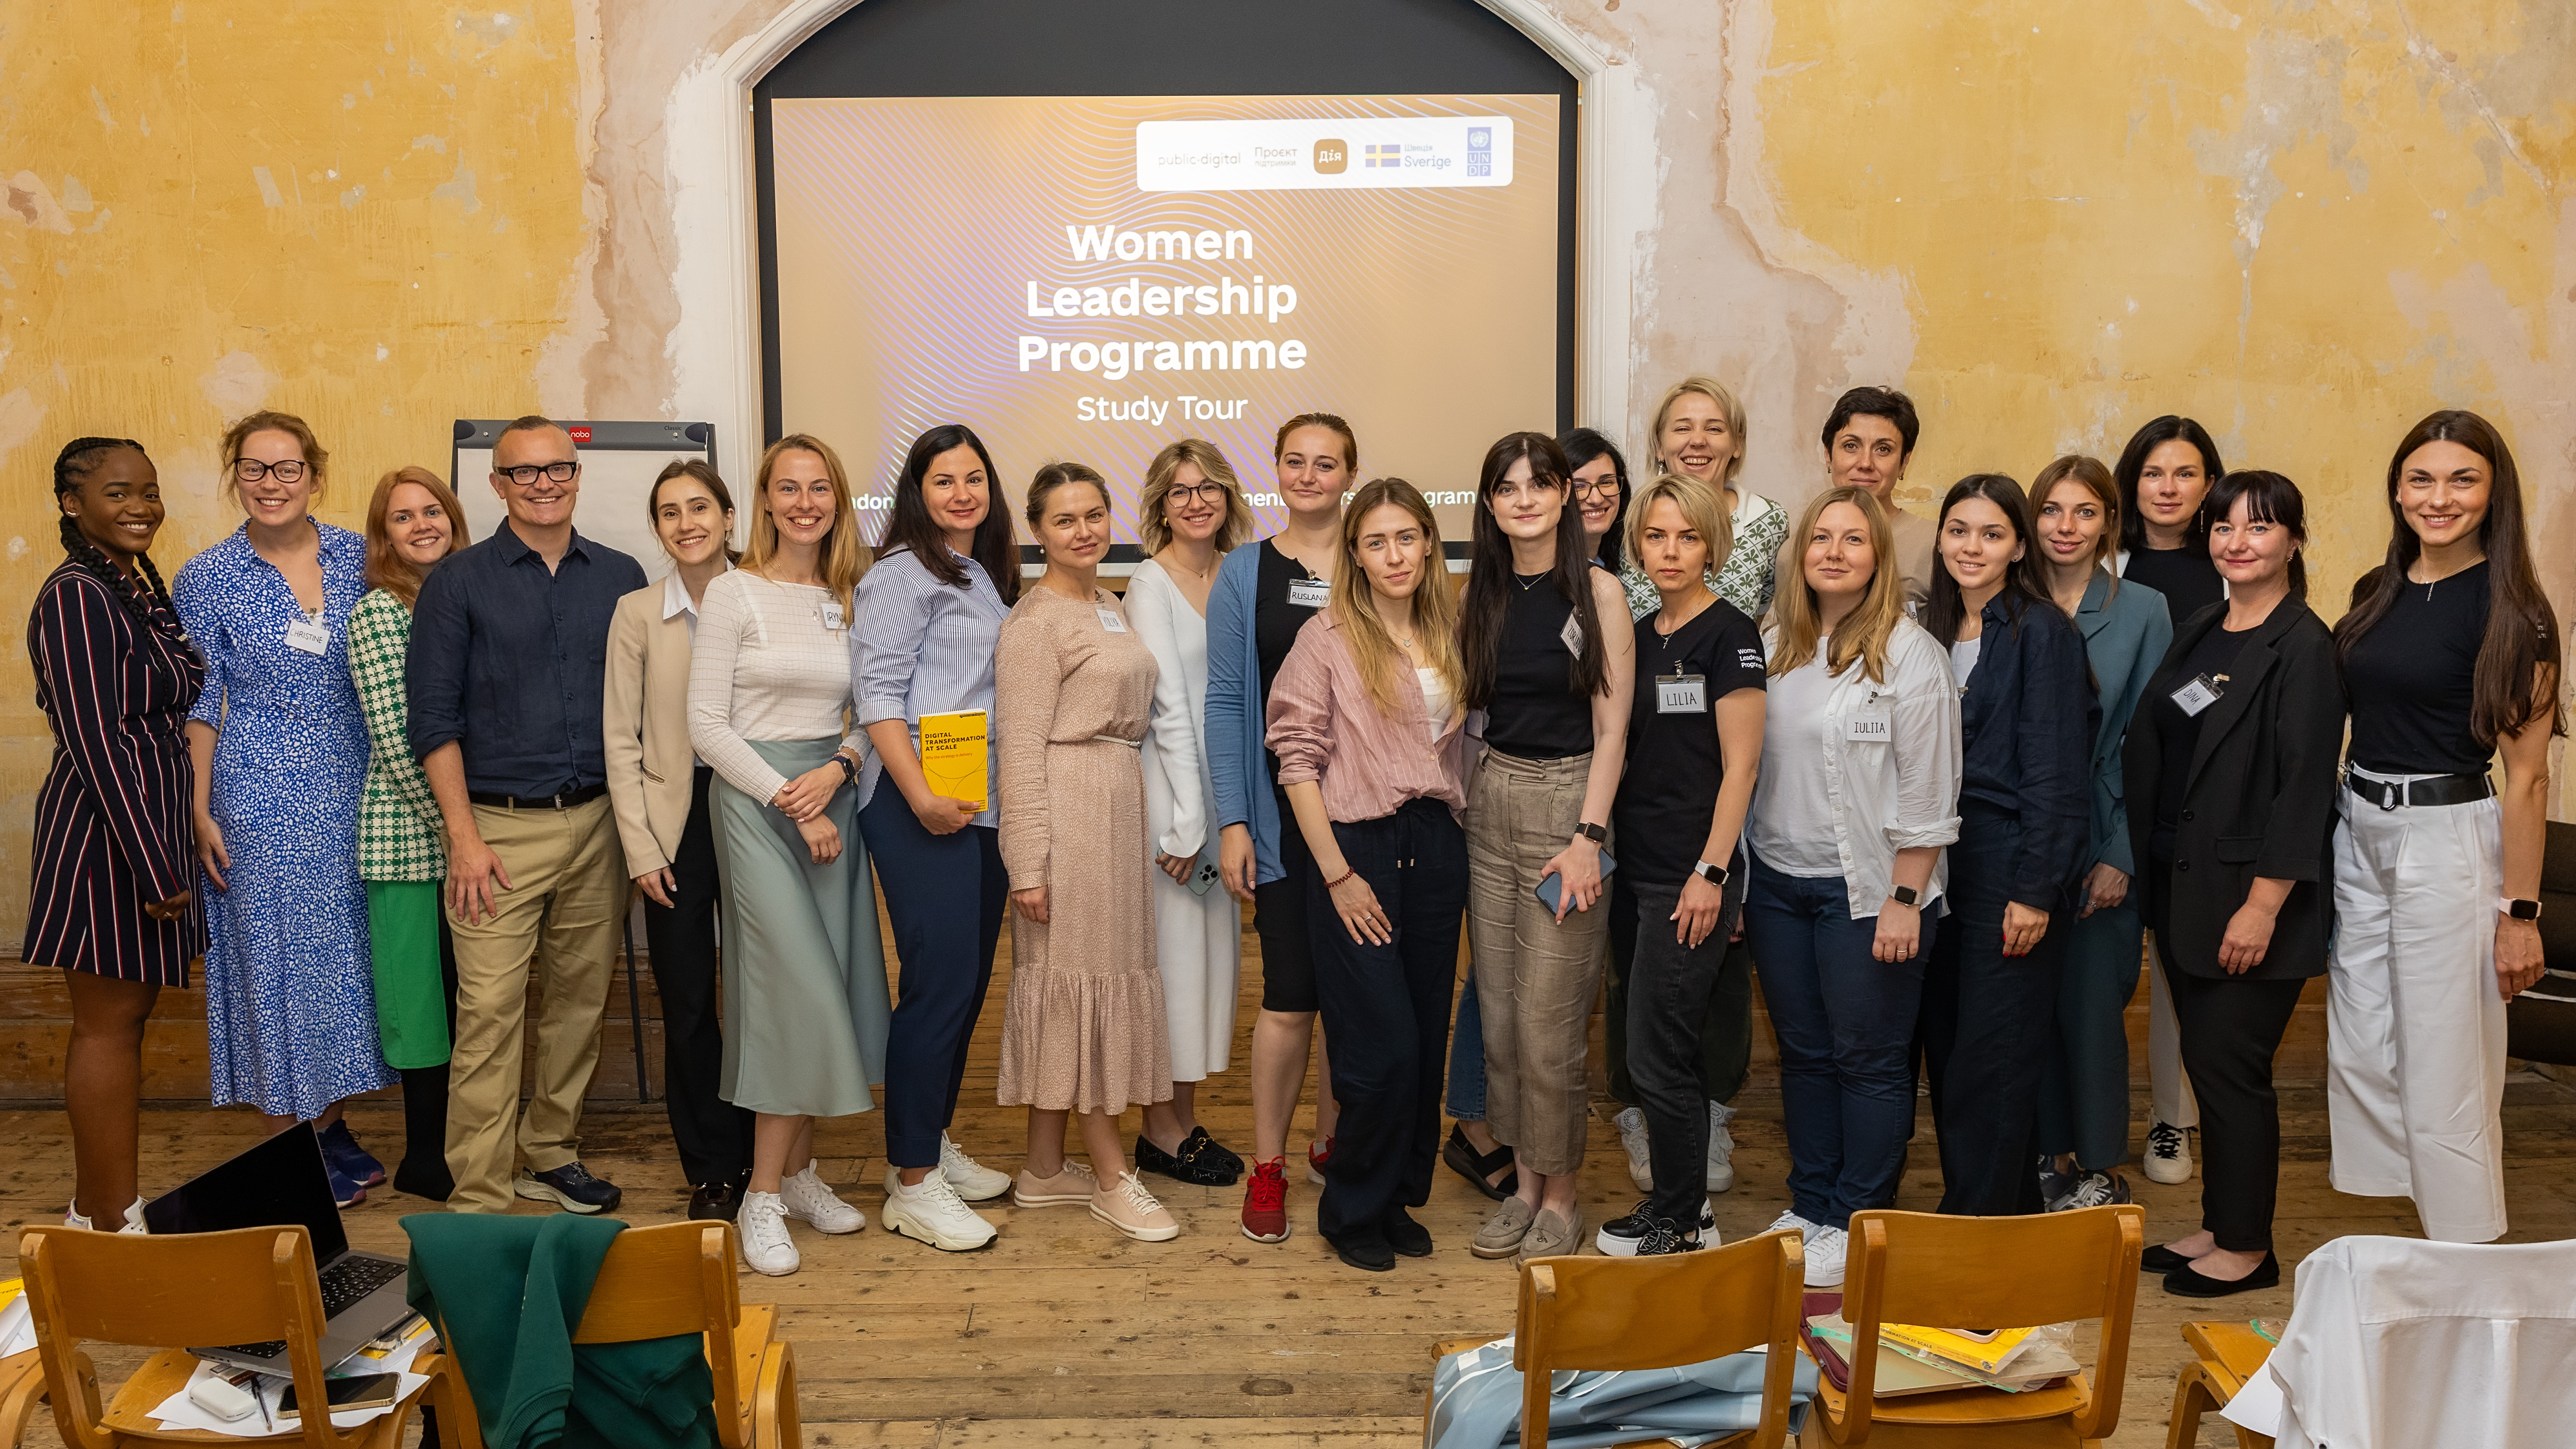 A group of people (mostly women but also a few men) are standing in front of a big screen with the inscription "Women Leadership Programme"